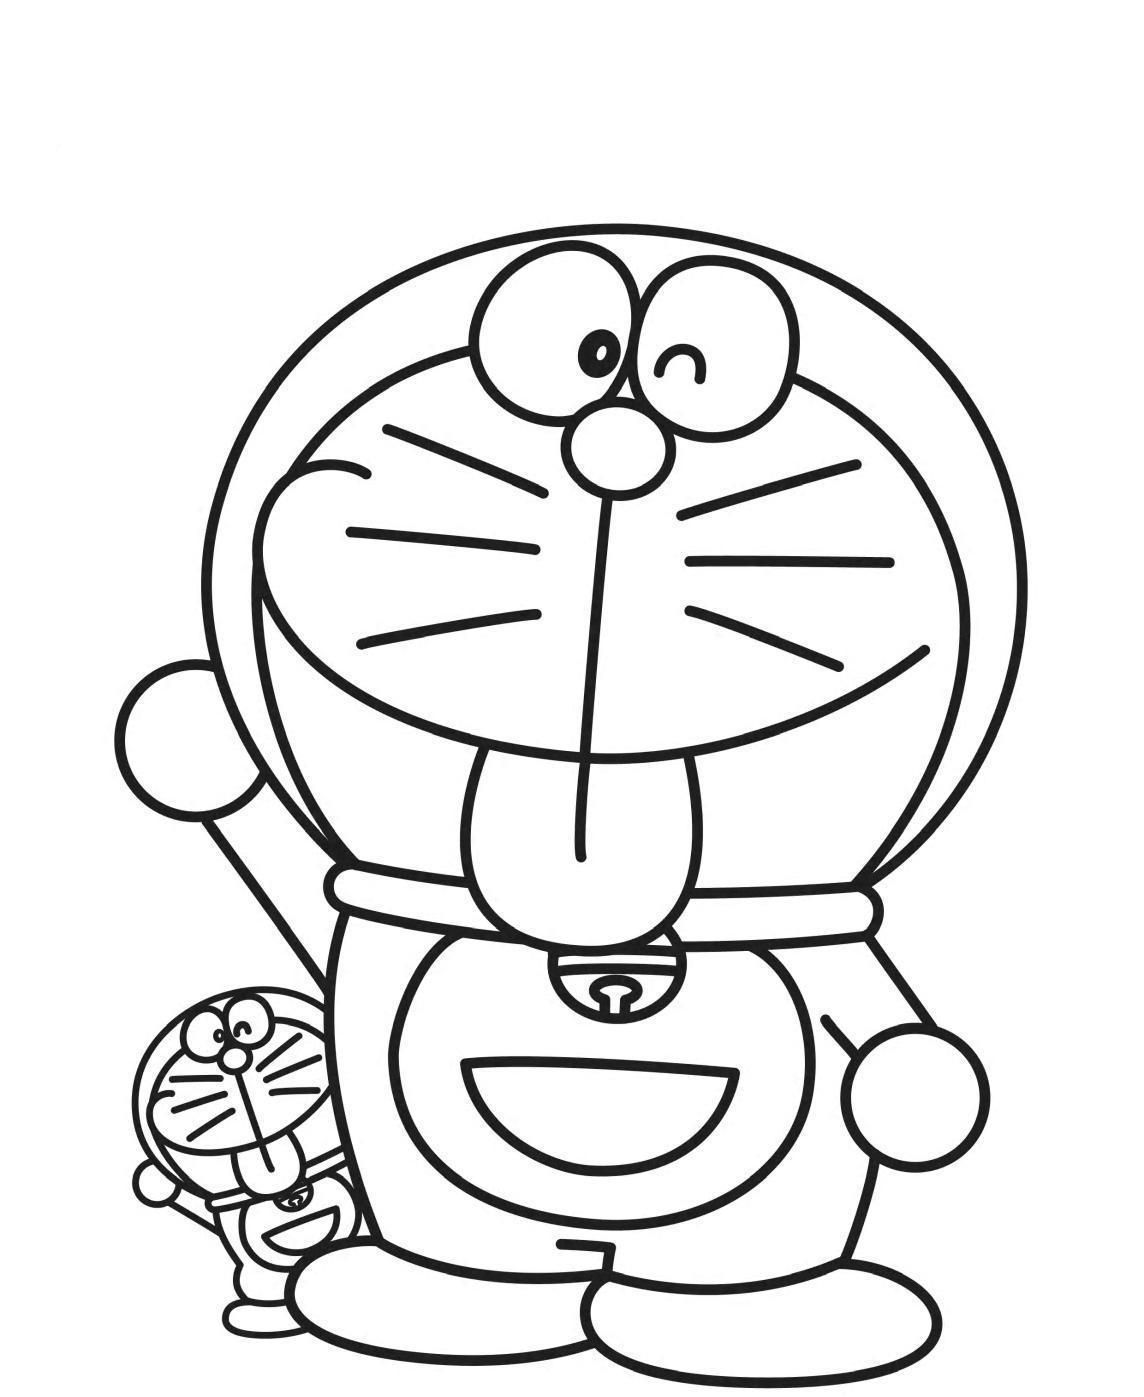 Doraemon Coloring Pages - Best Coloring Pages For Kids